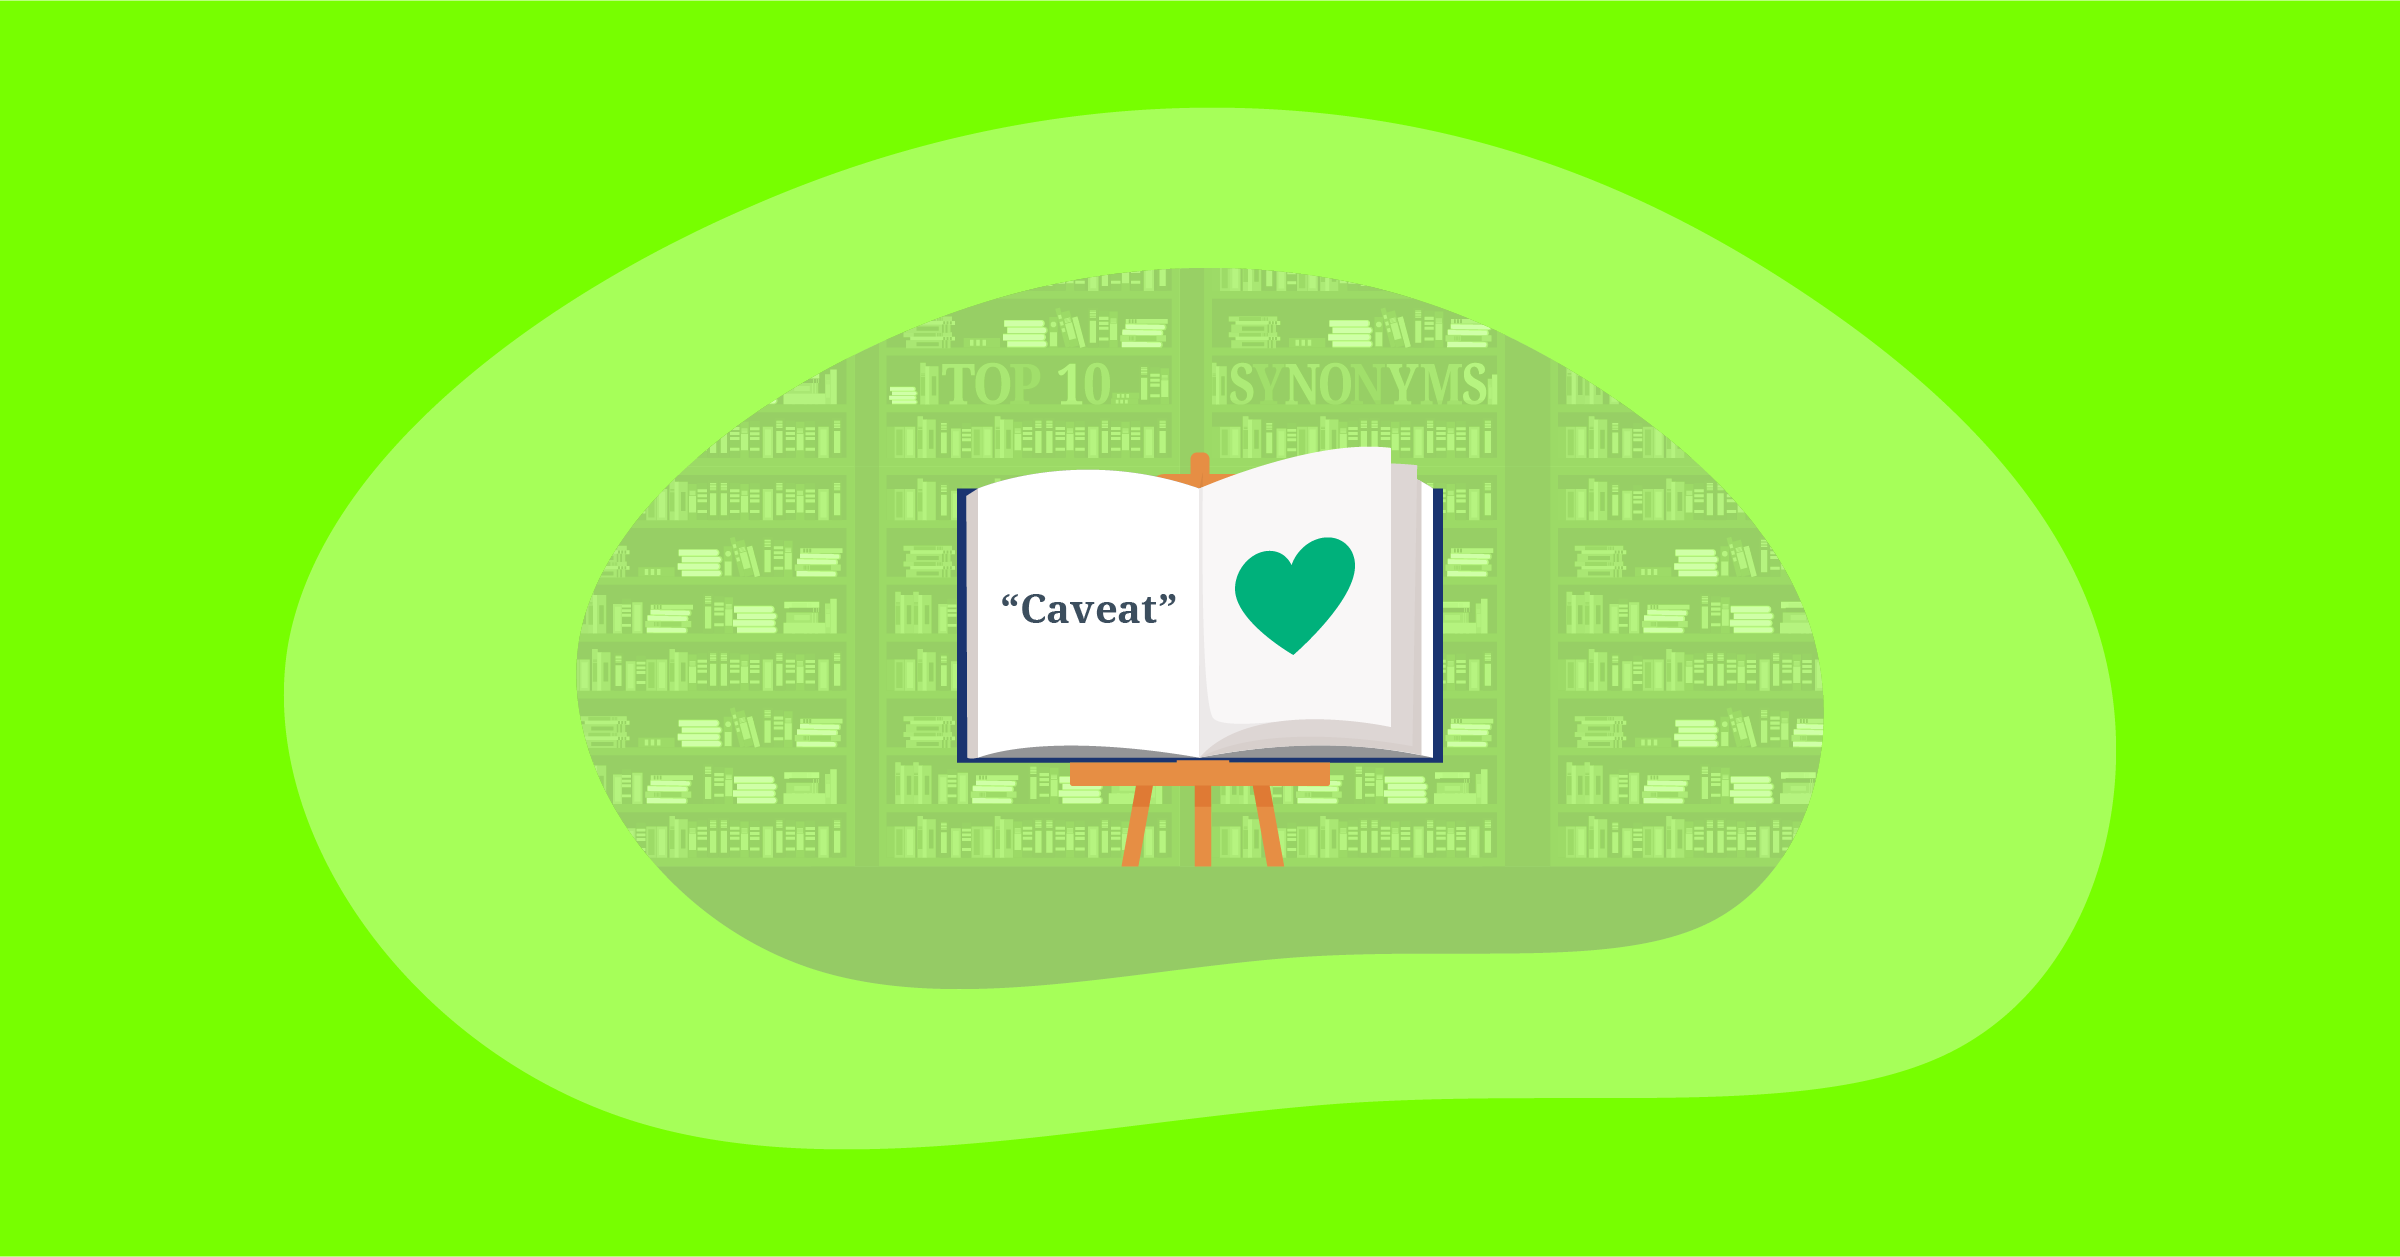 Illustration for Top 10 Positive & Impactful Synonyms for “Caveat”